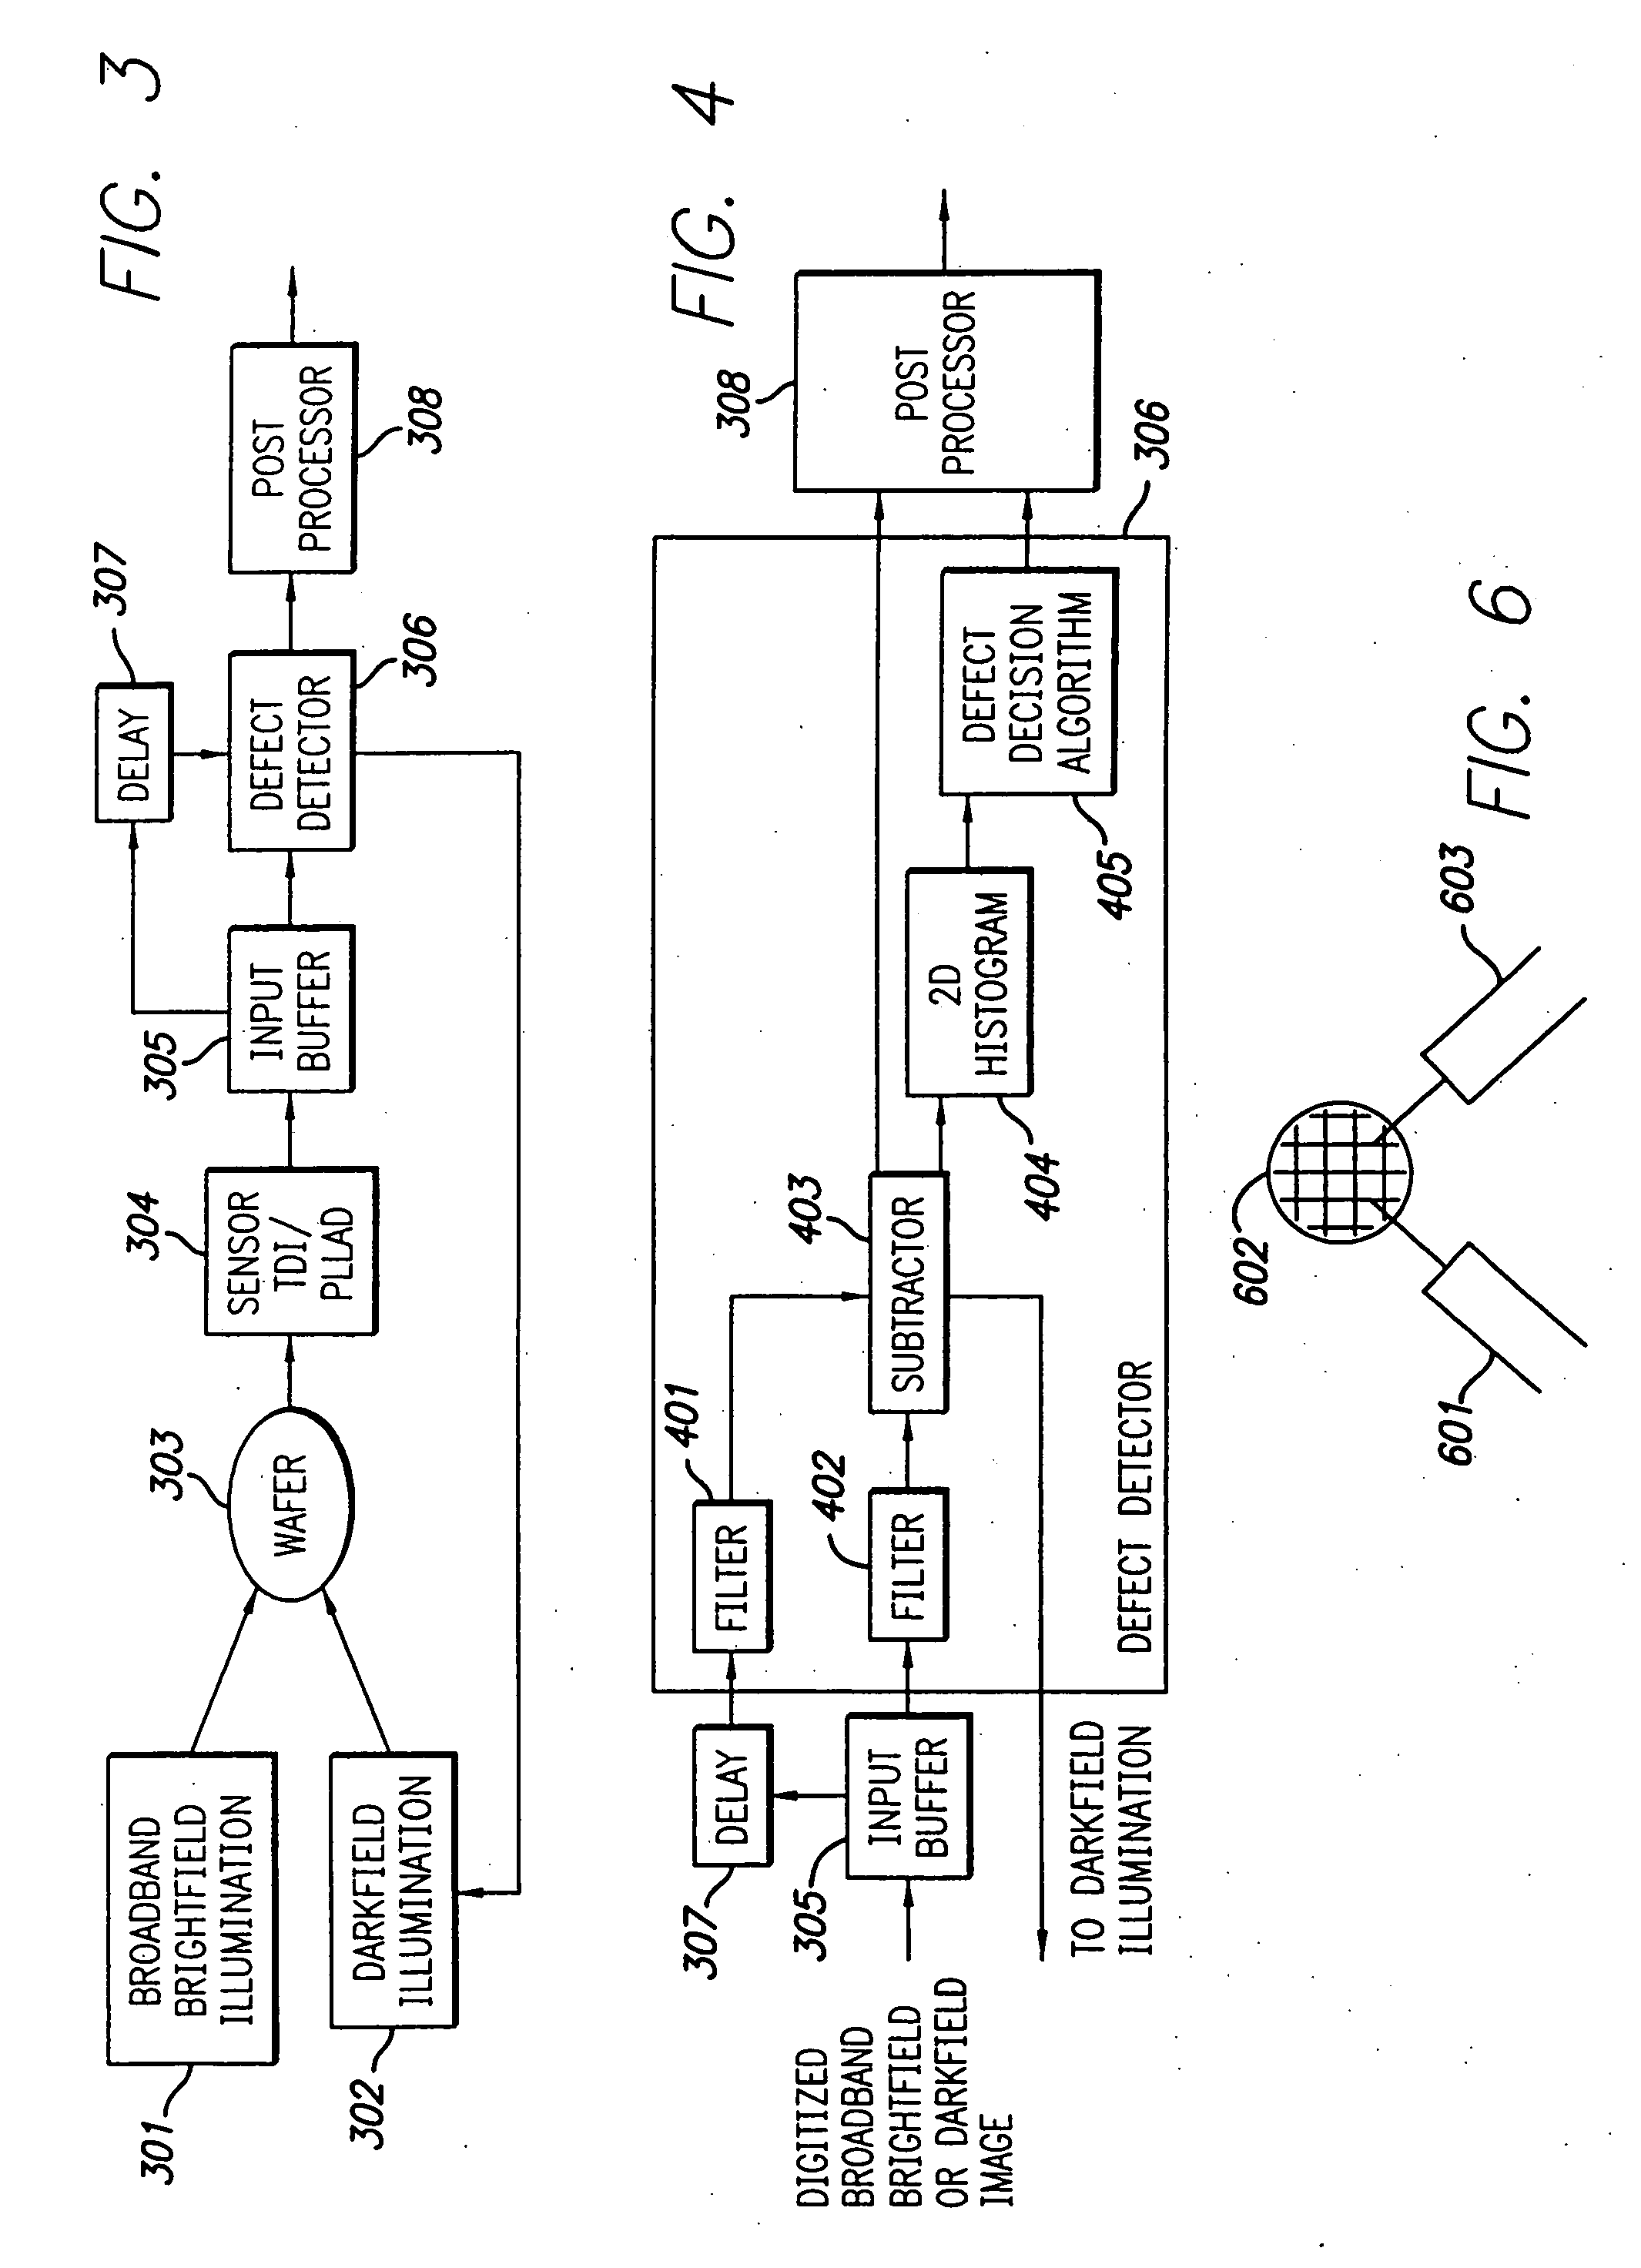 High throughput brightfield/darkfield wafer inspection system using advanced optical techiques